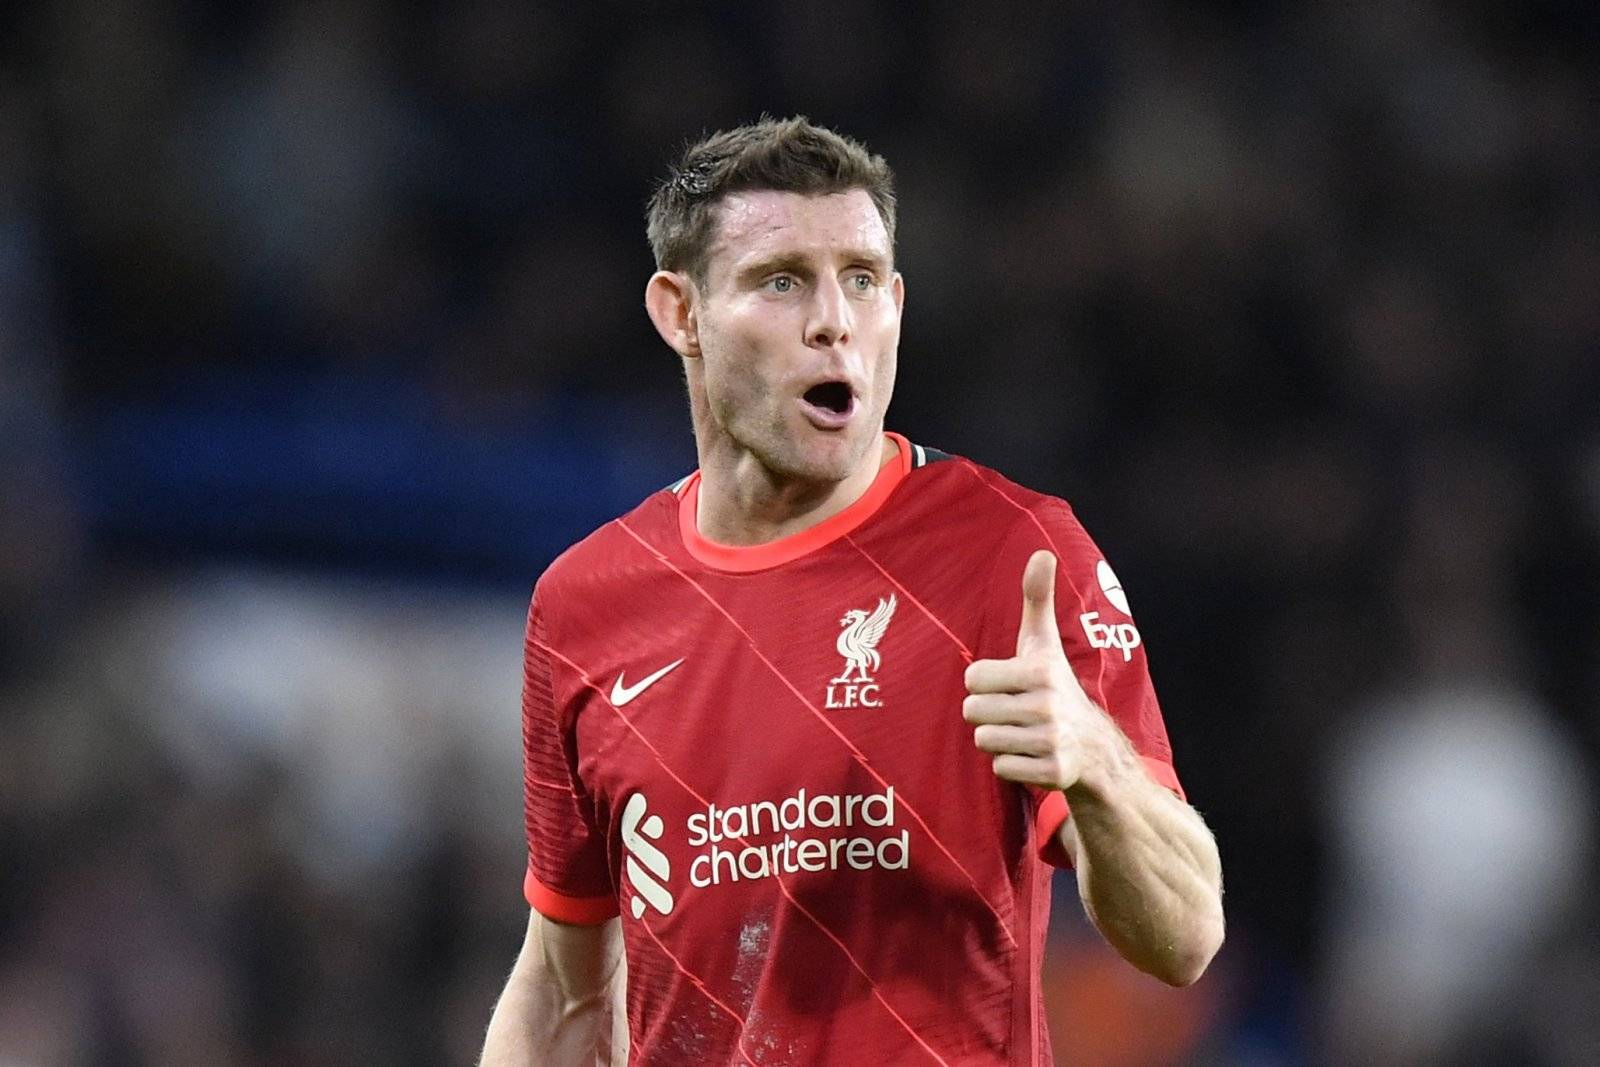 Liverpool: James Milner available again after injury - Liverpool News